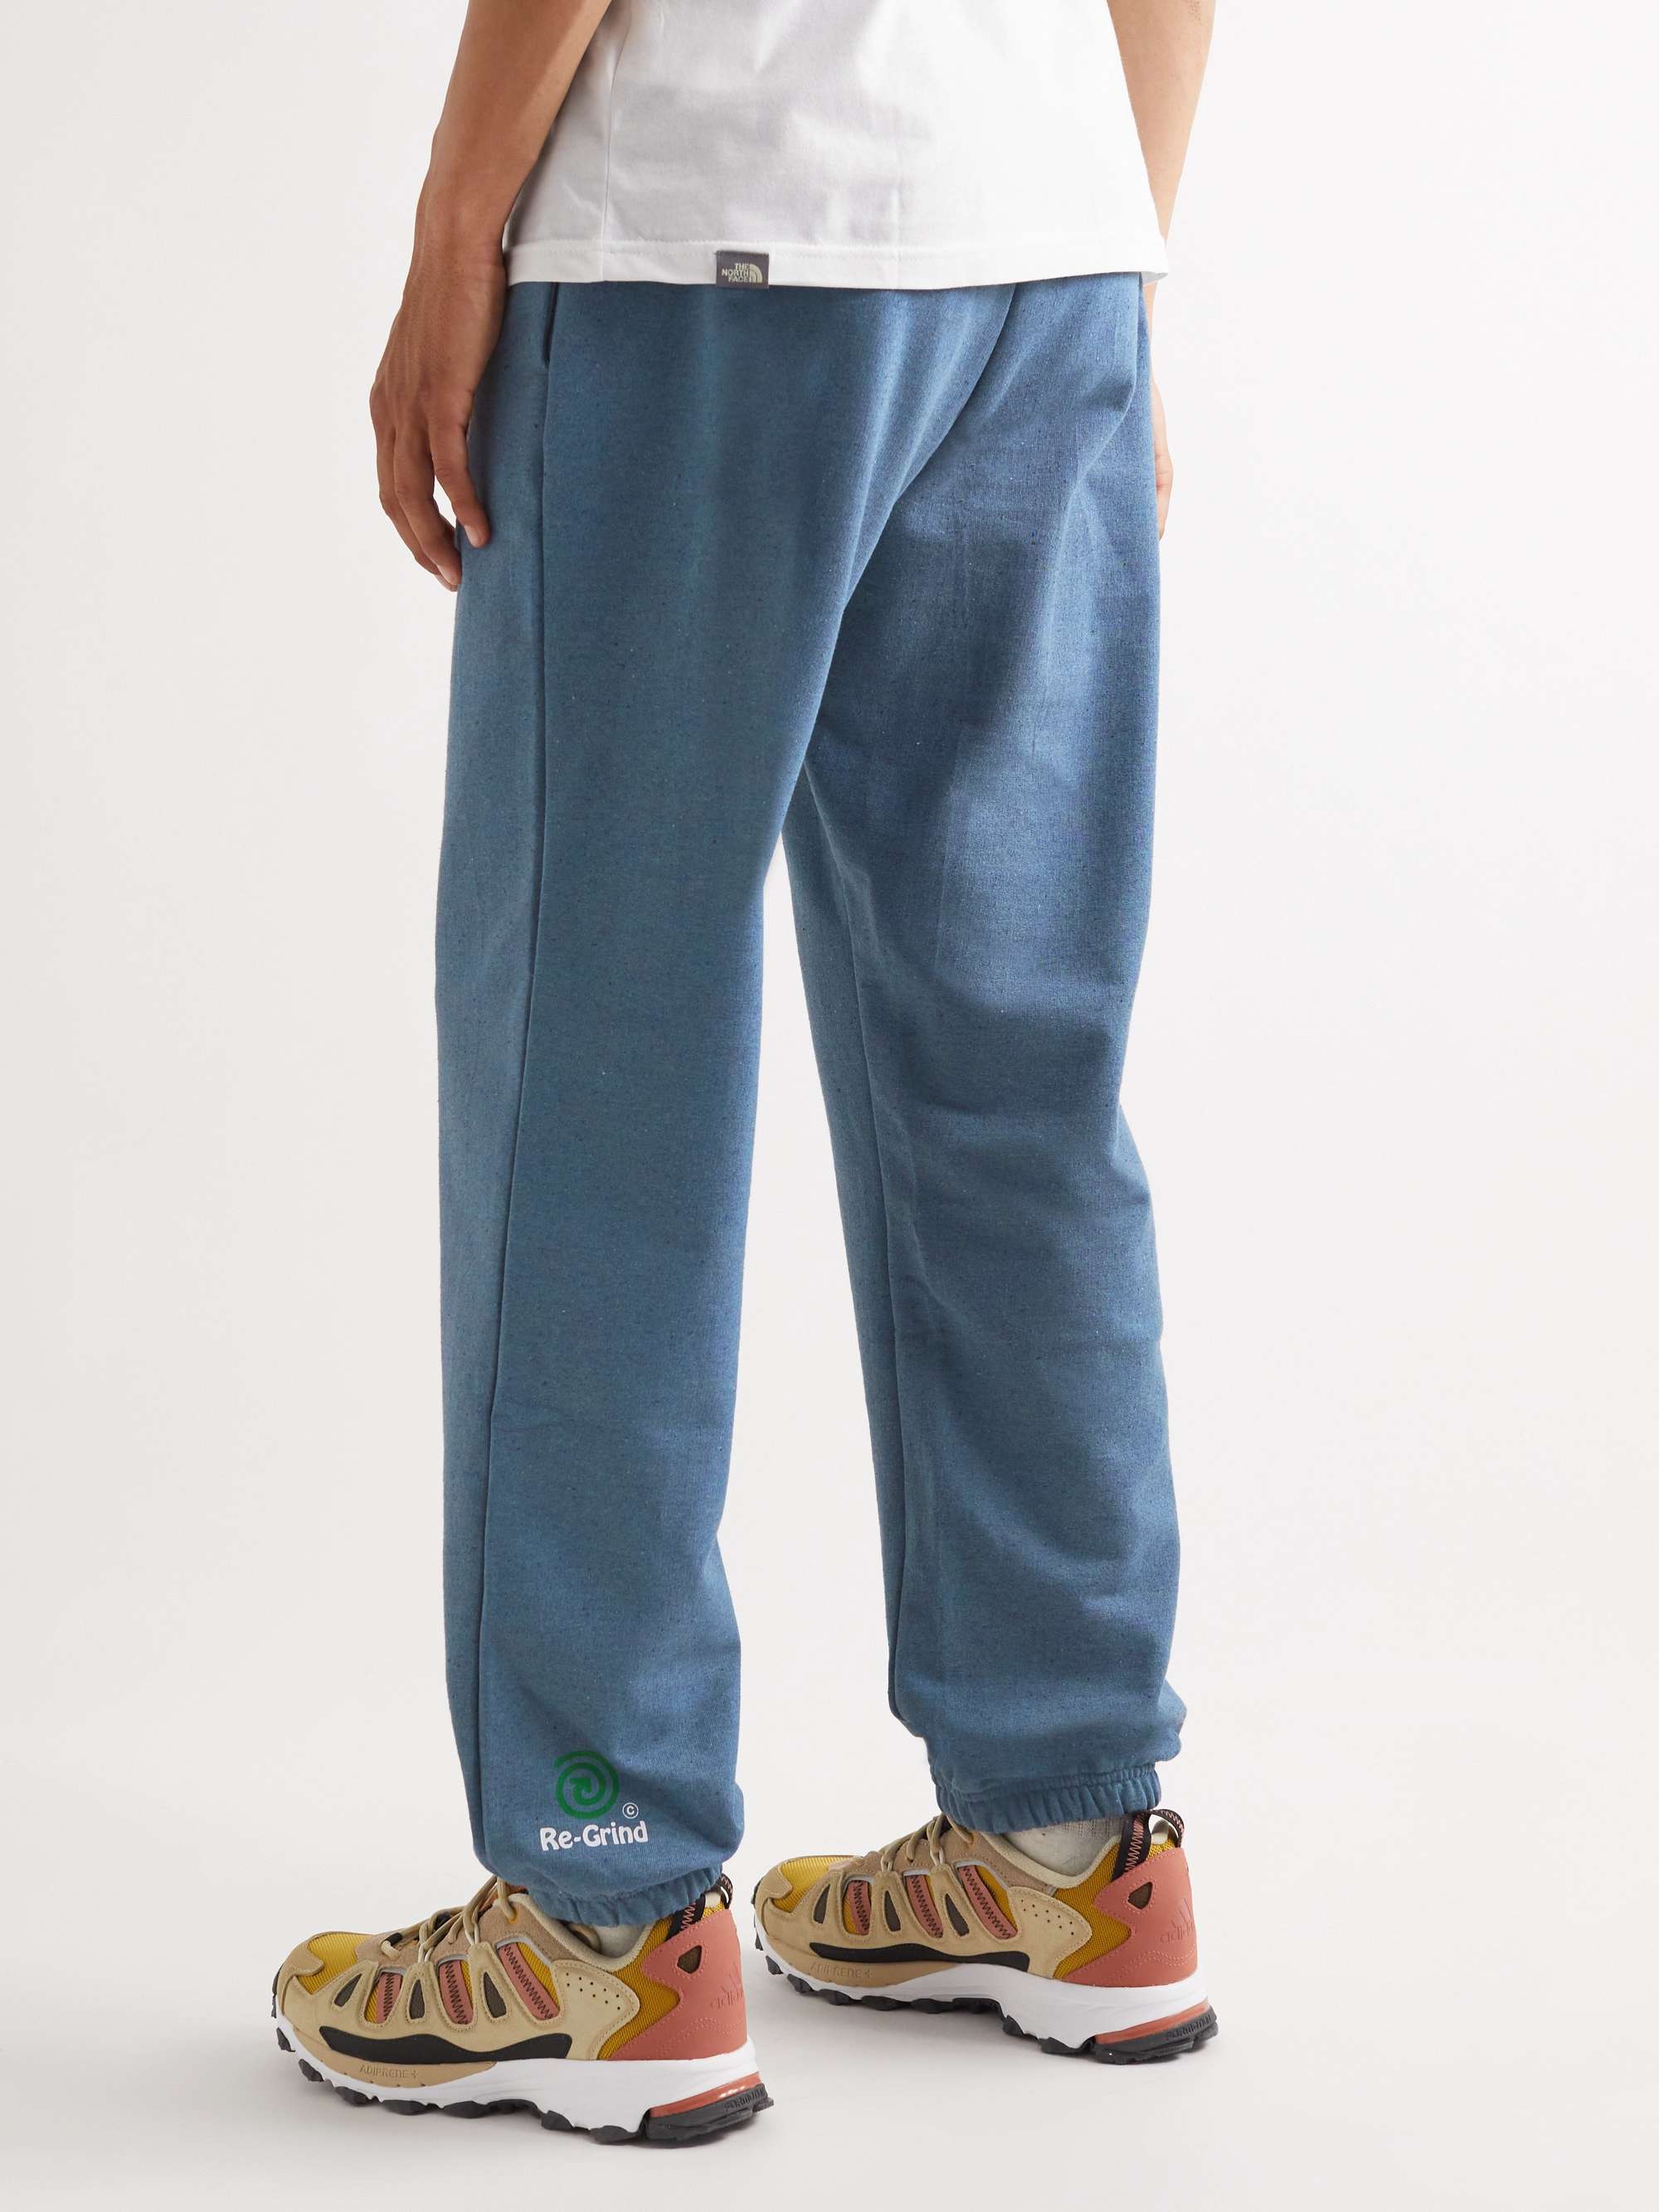 THE NORTH FACE + OC Logo-Print Recycled Cotton-Blend Fleece Sweatpants